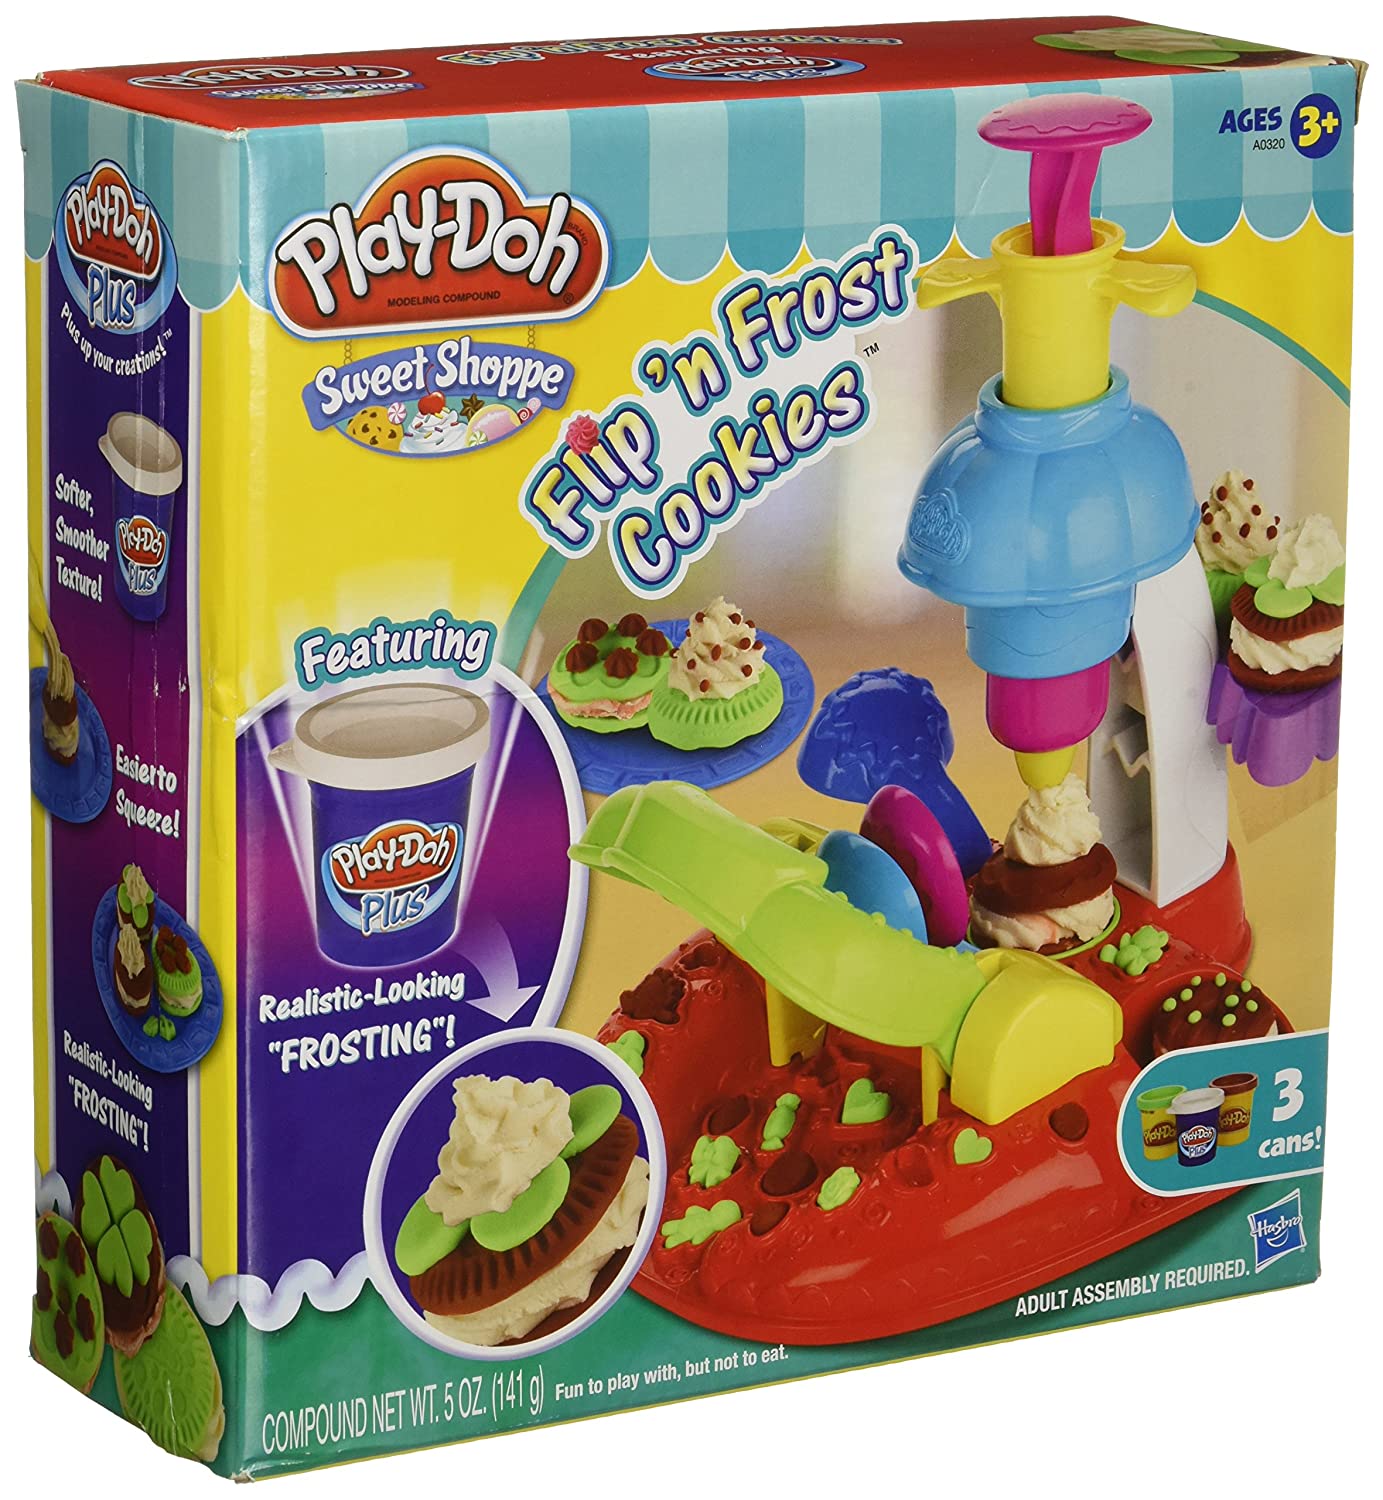 Top 8 Best Play Dough Sets for Boys Reviews in 2022 4